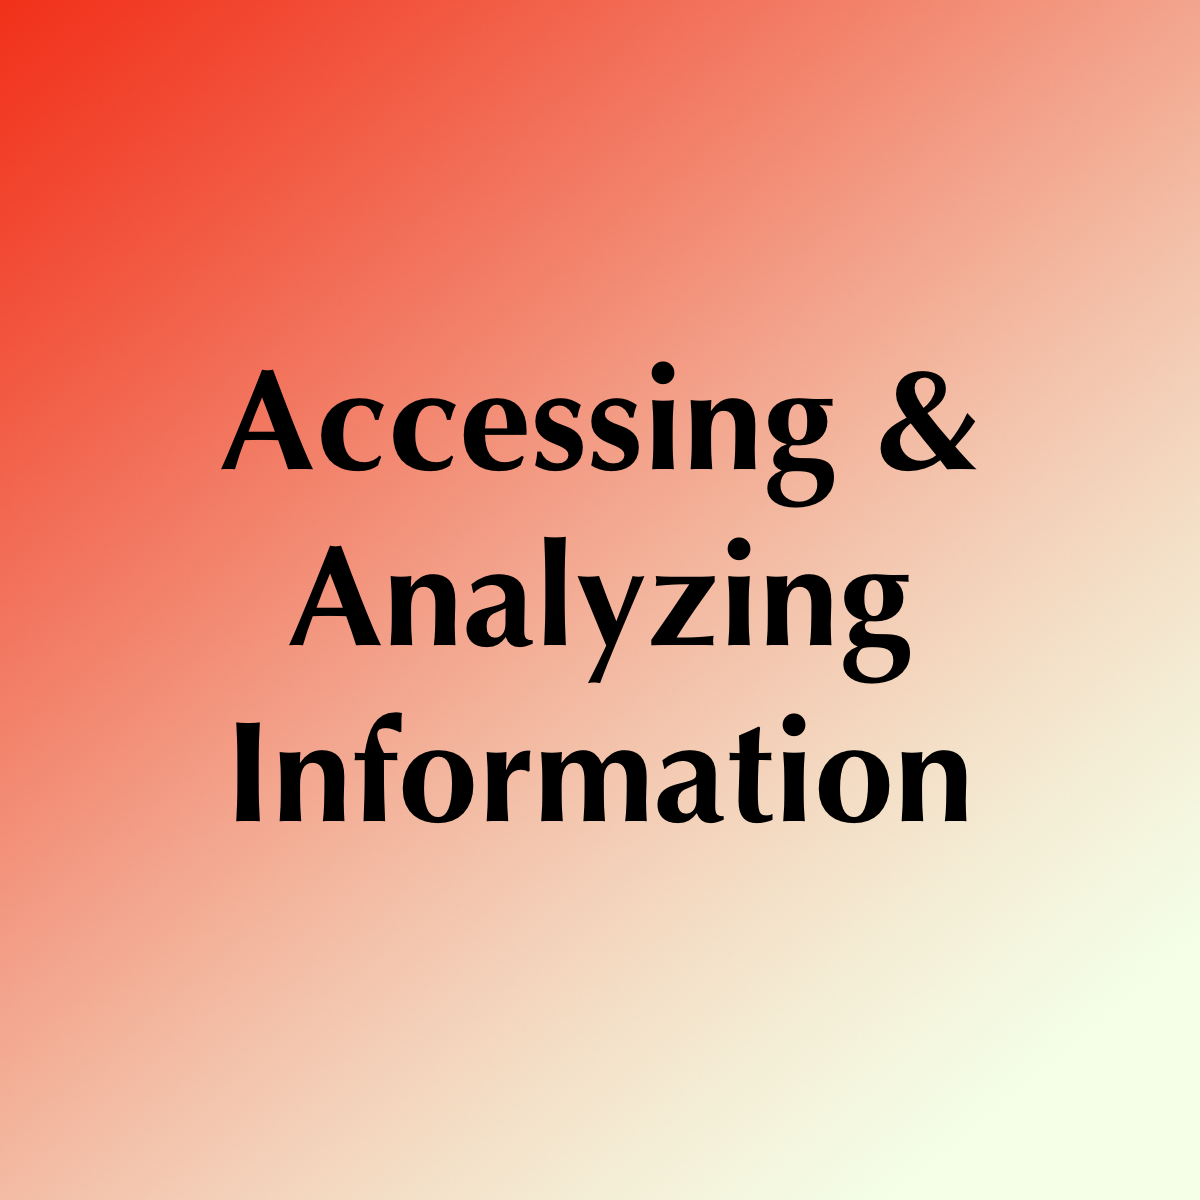 Accessing & Analyzing Information